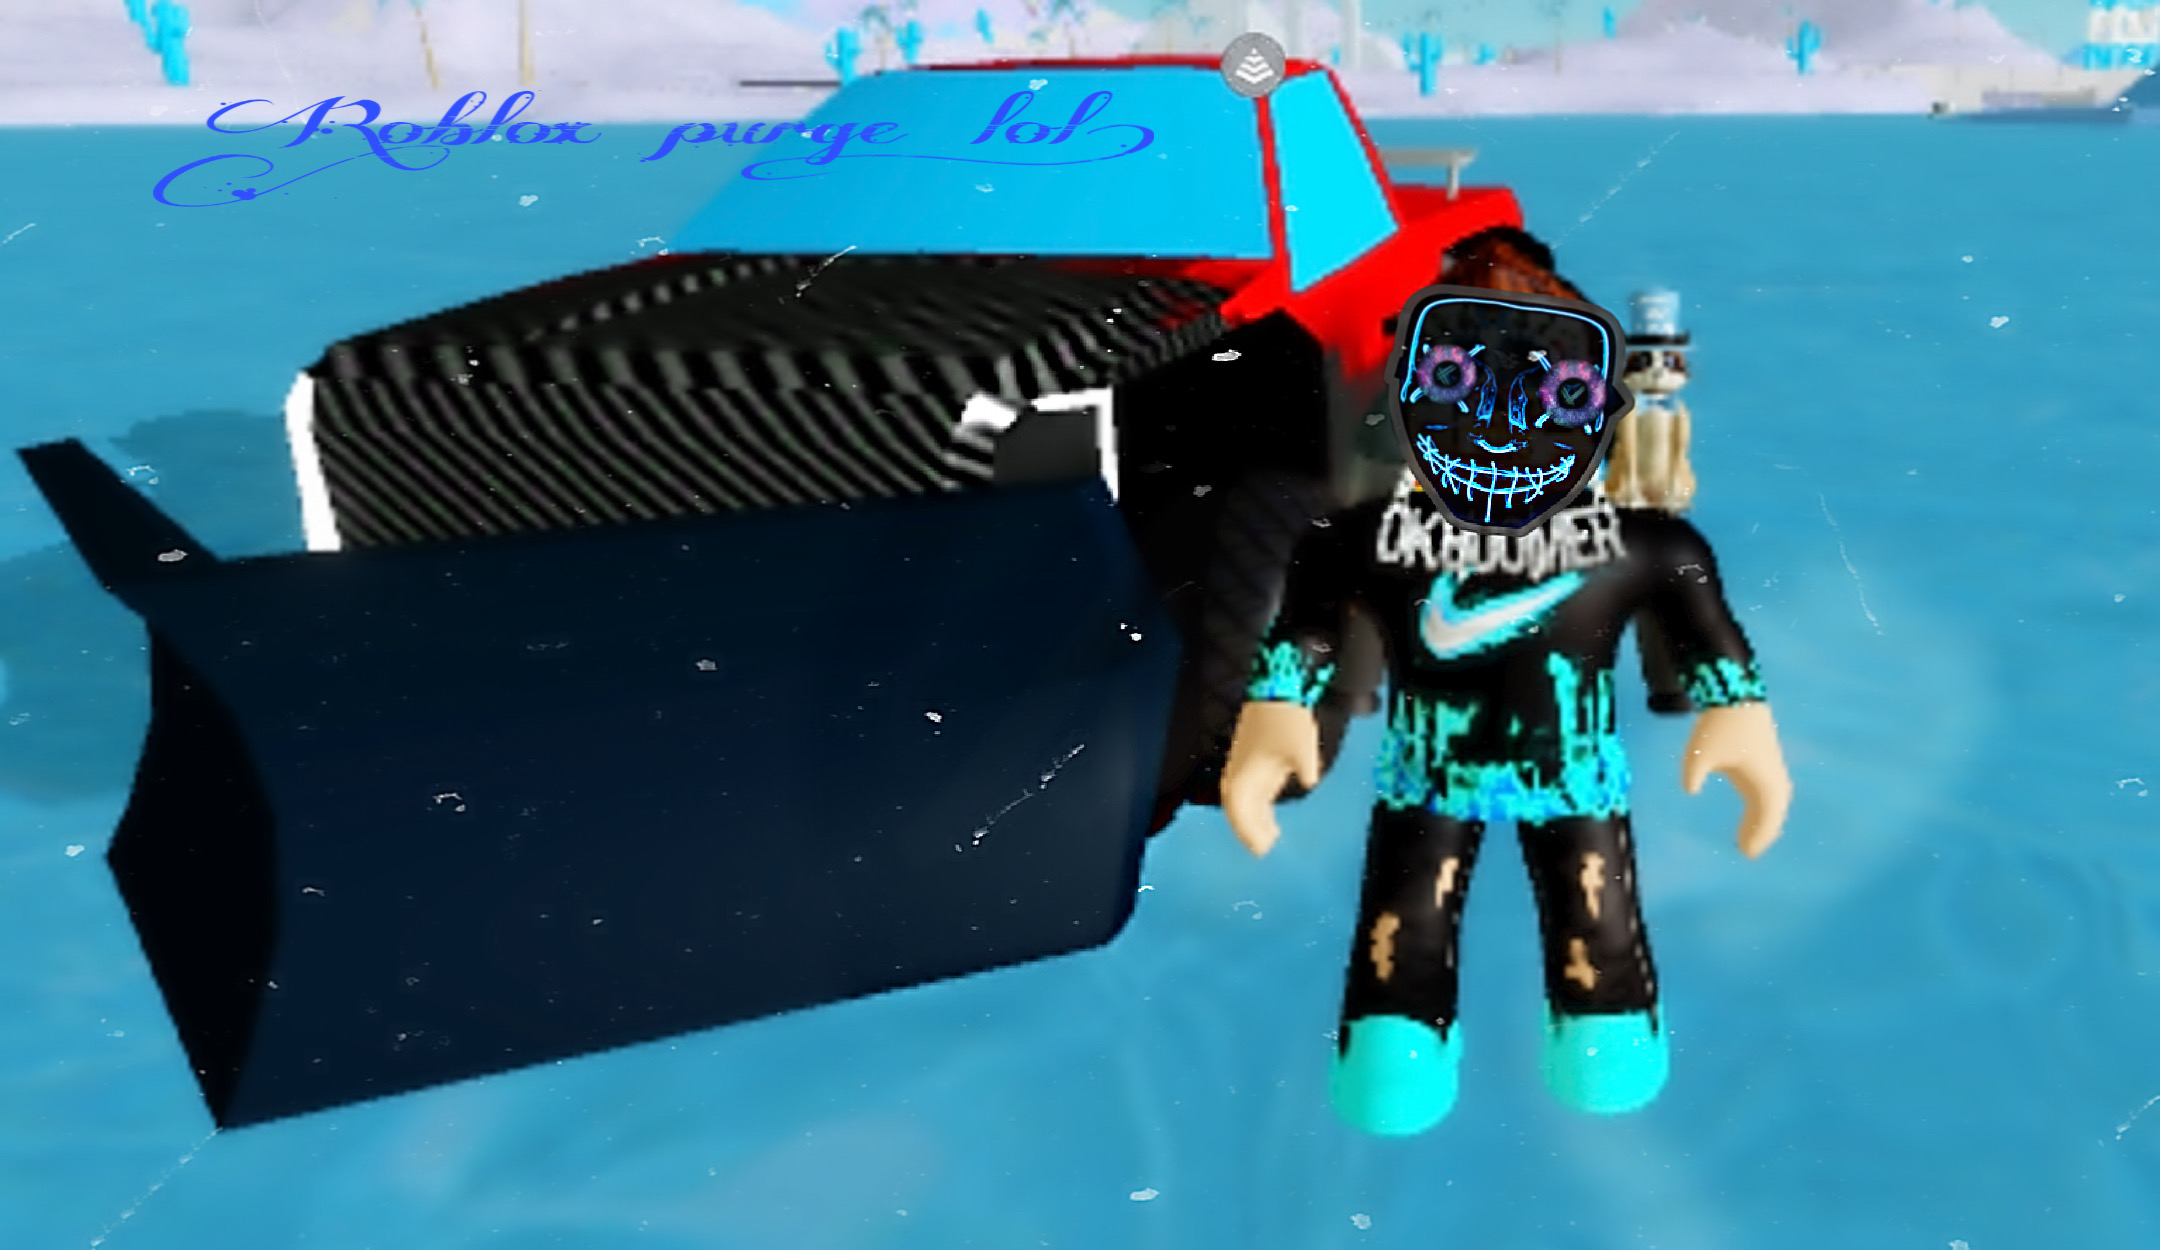 Roblox Purgemask Image By Leandrew1155 - images of roblox scuba experience